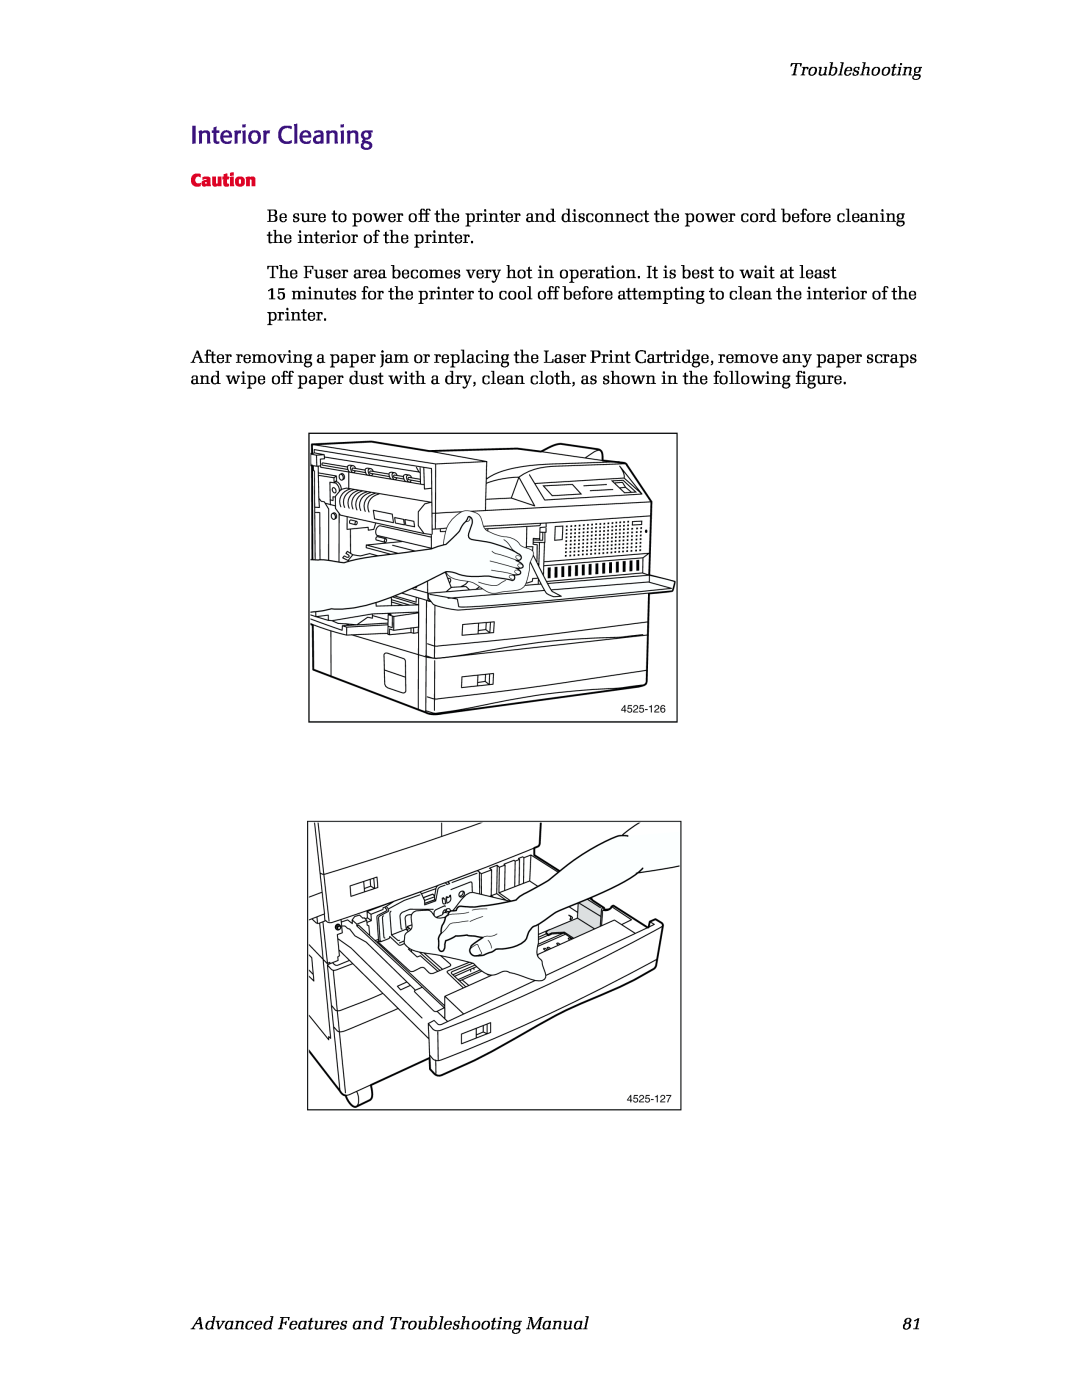 Xerox N4525 manual Interior Cleaning, Advanced Features and Troubleshooting Manual 